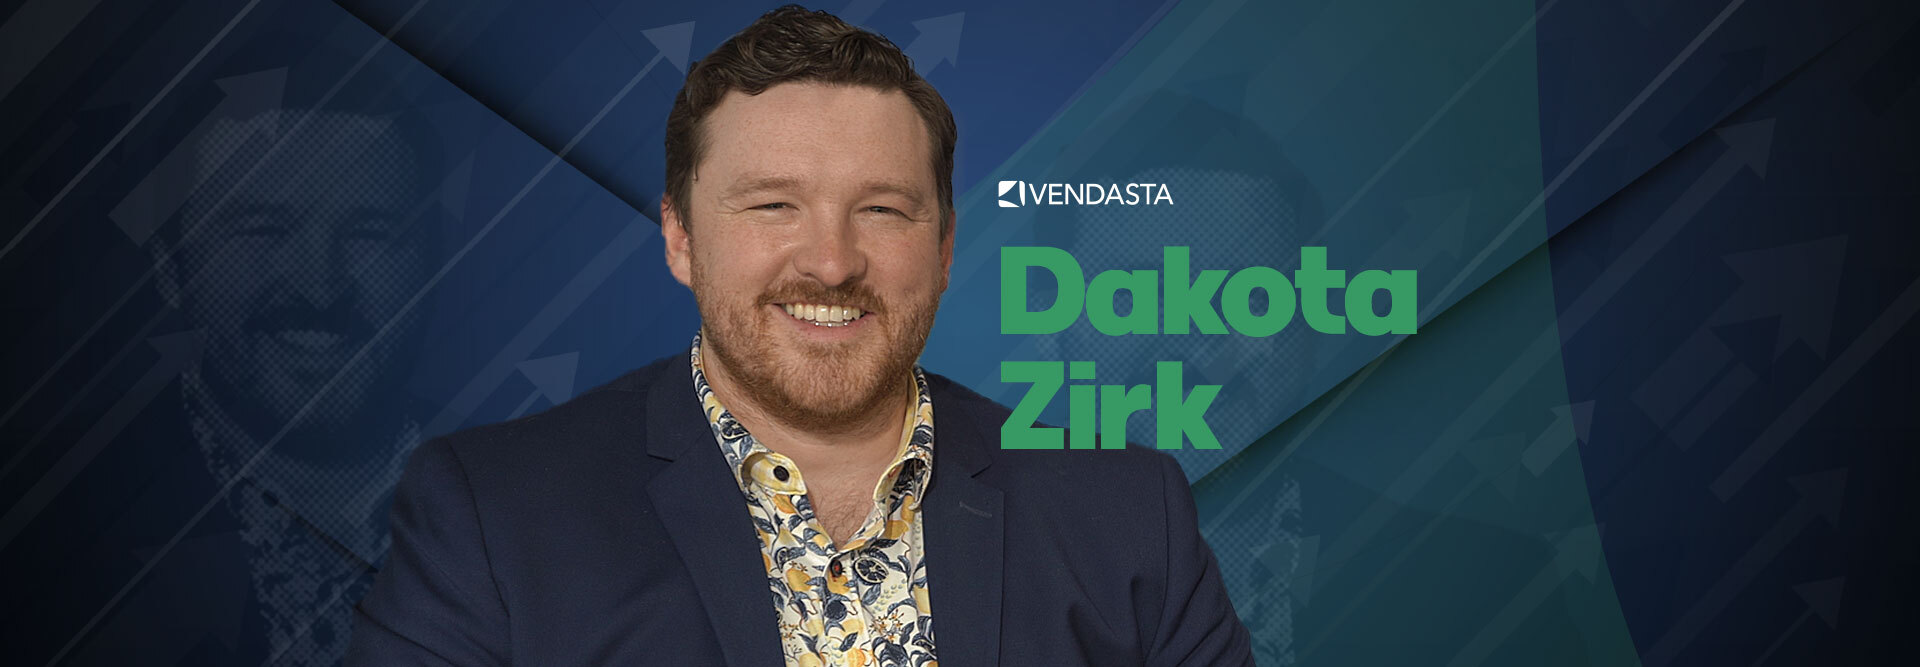 Vendasta Account Manager Team Lead Dakota Zirk discusses how to sell marketing services in a tough sales environment.